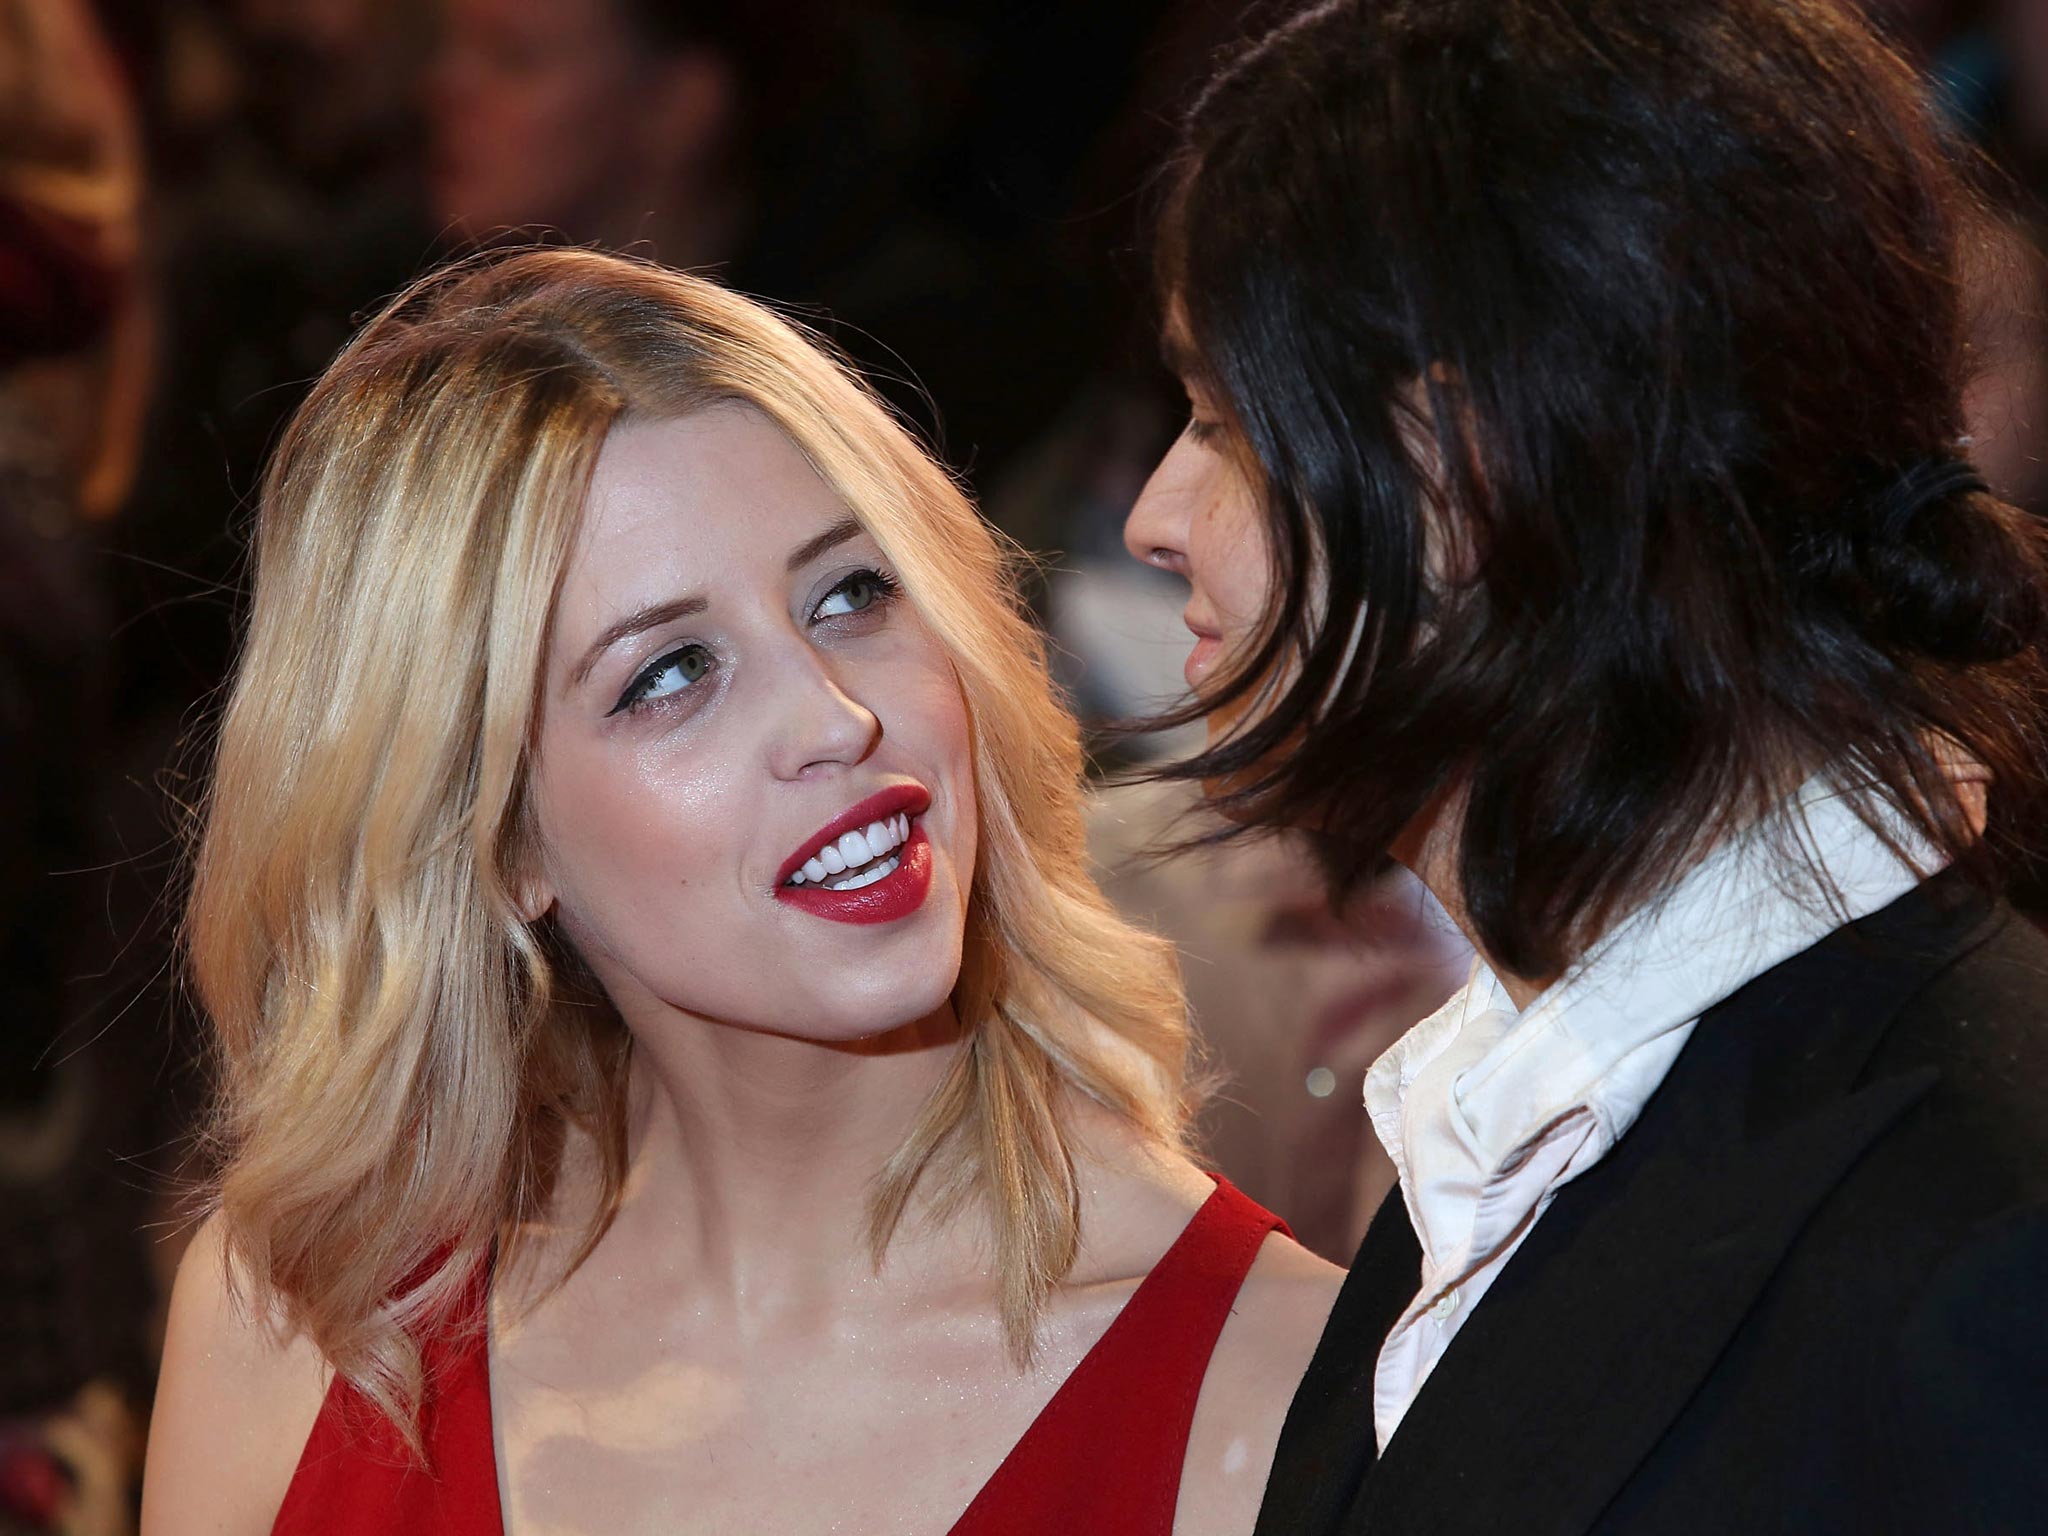 Peaches Geldof's Body Released to Family for Funeral